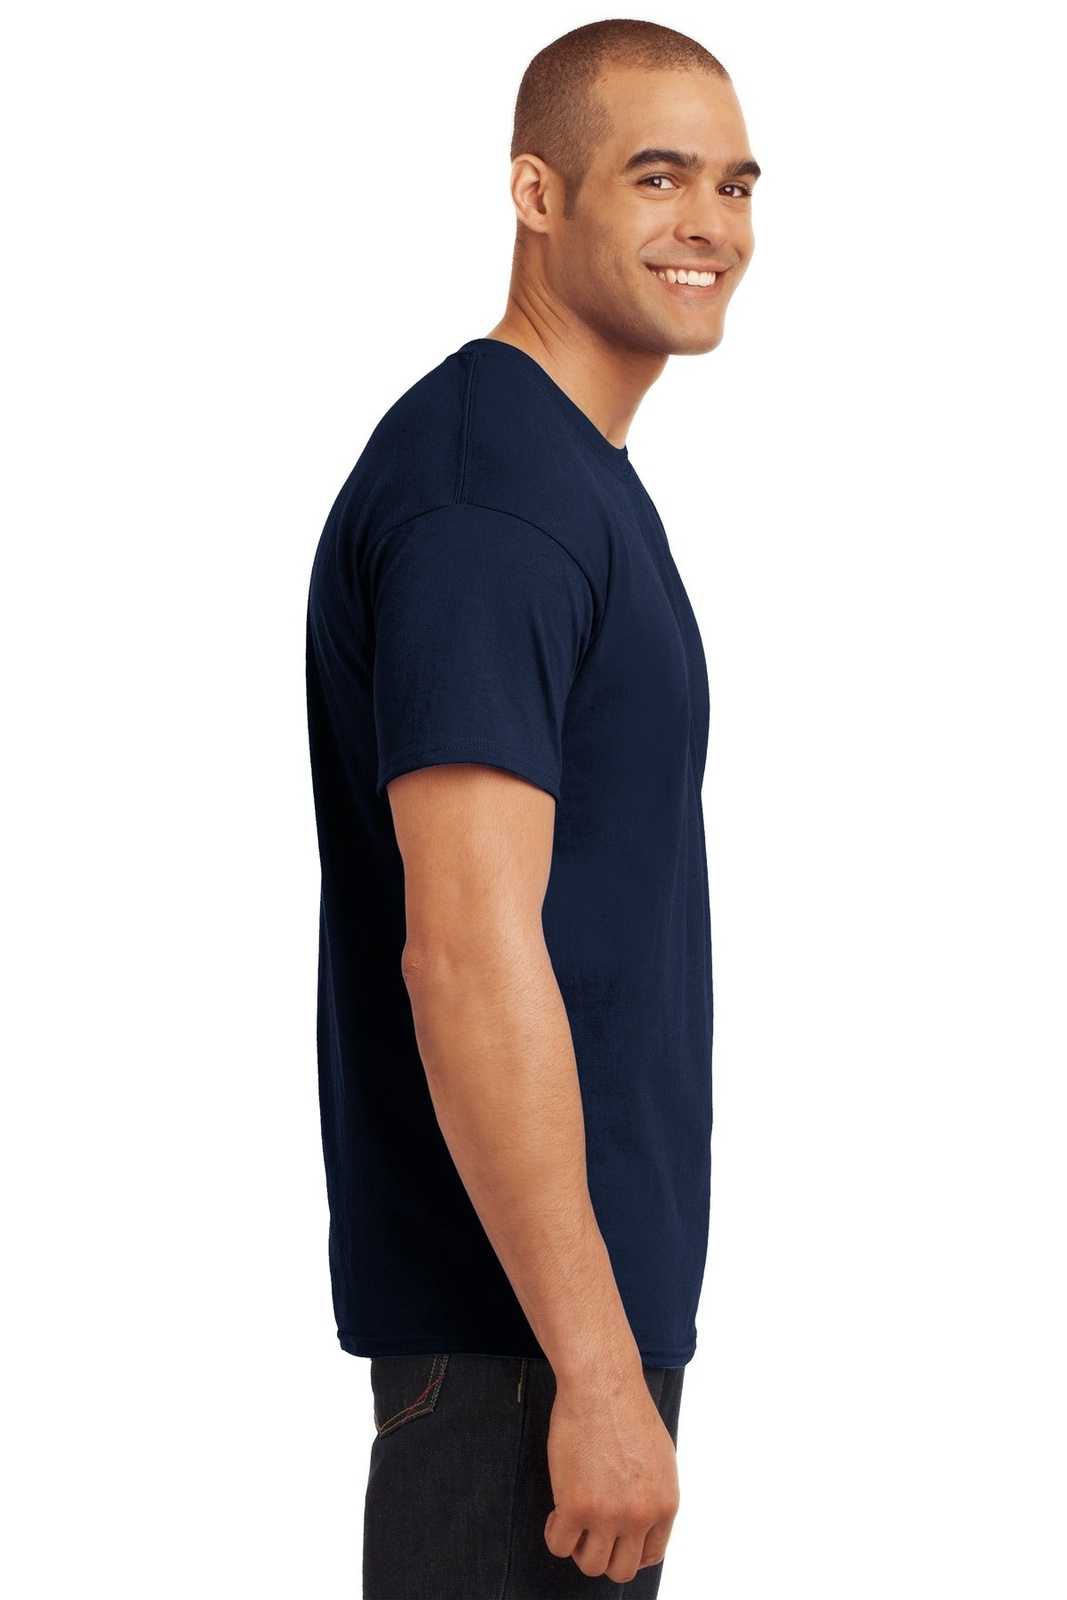 Hanes 5170 Ecosmart 50/50 Cotton/Poly T-Shirt - Navy - HIT a Double